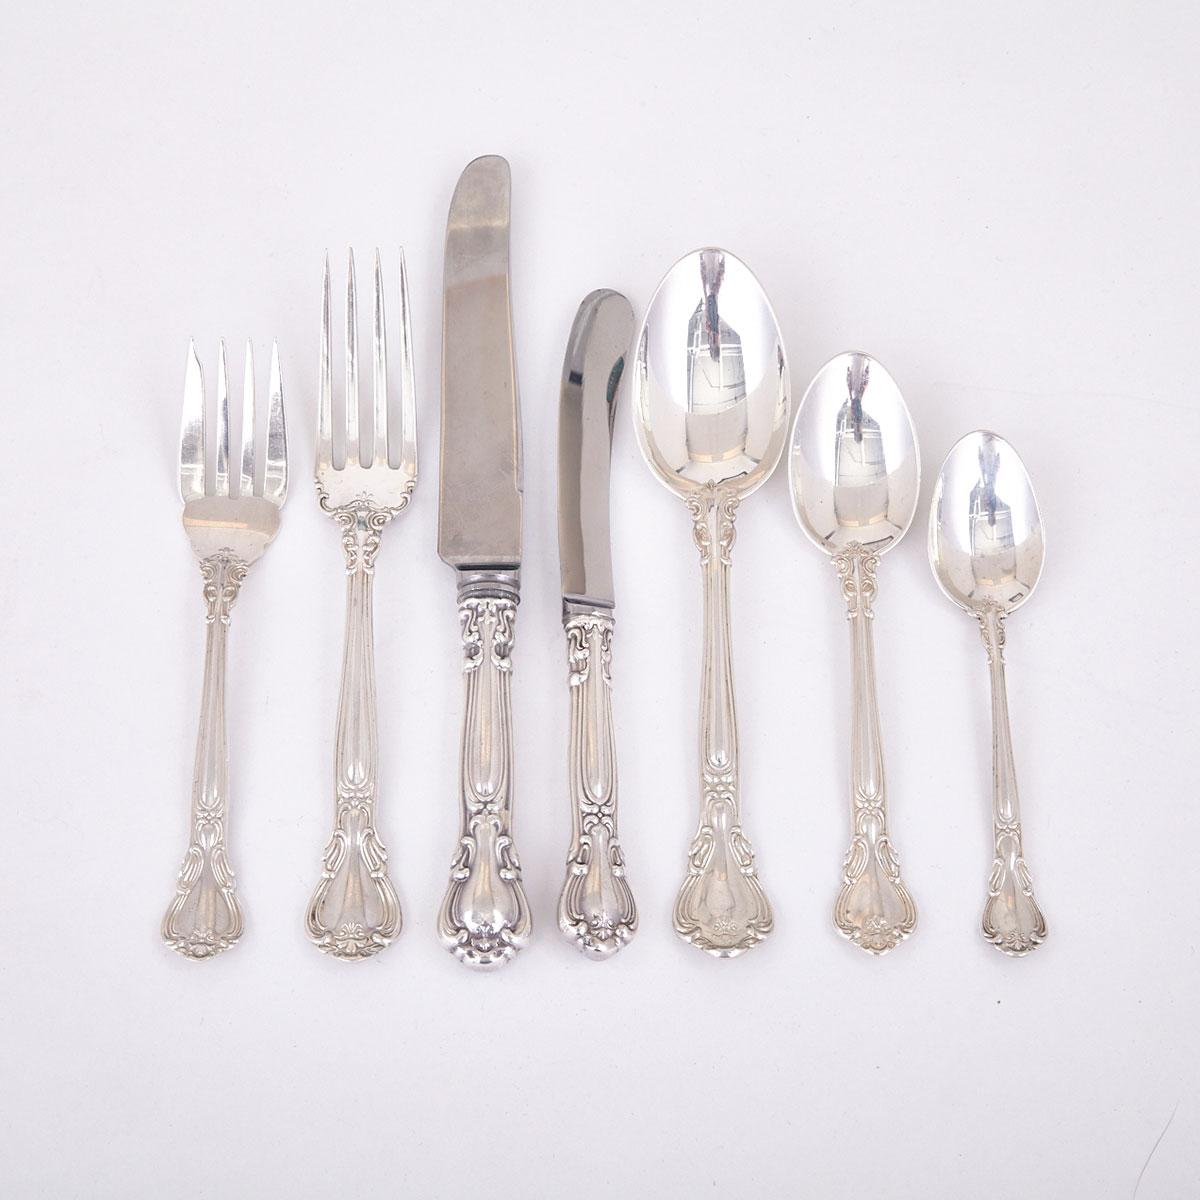 Canadian Silver ‘Chantilly’ Pattern Flatware Service, Henry Birks & Sons, Montreal, Que., 20th century